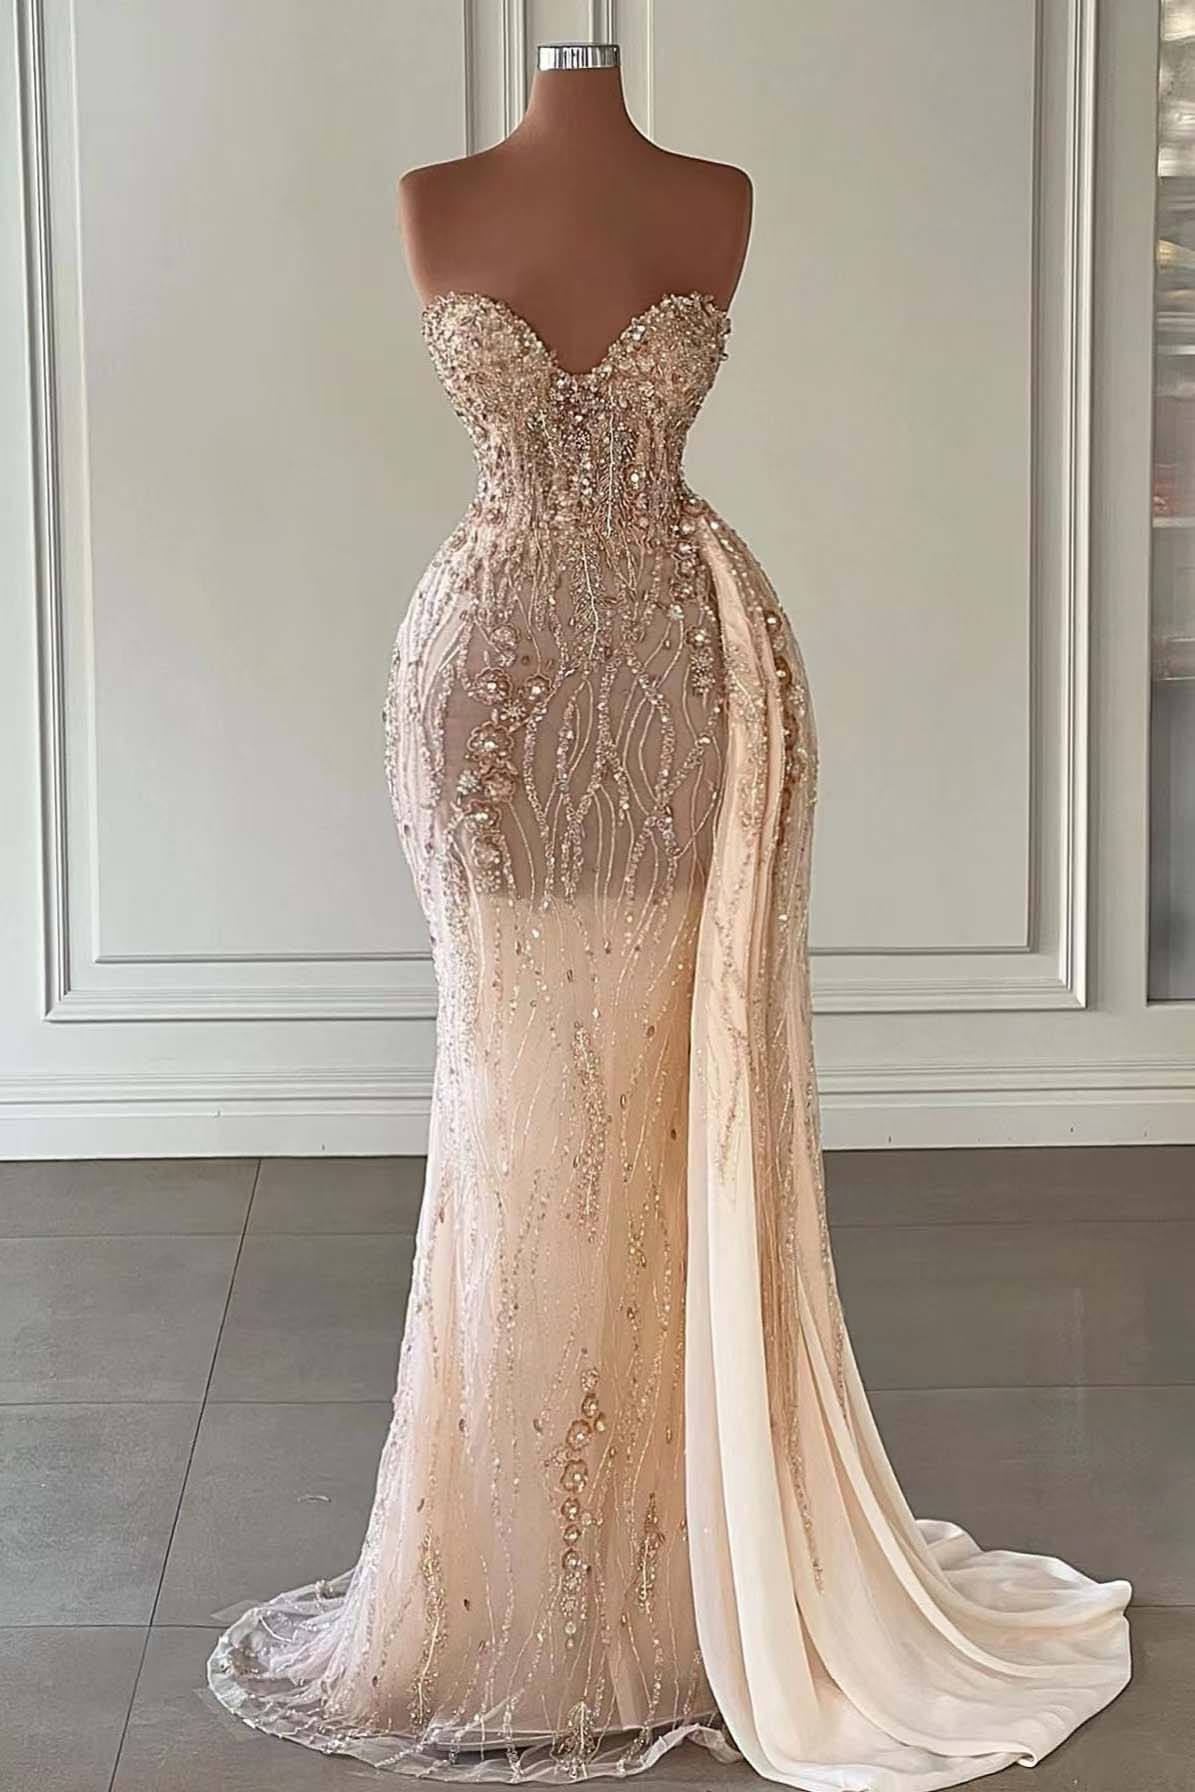 Shine Detachable Mermaid Evening Dresses With Lace Applique Sweetheart Gowns Sweep Train Party Gown Robe De Soiree custom Made L240107